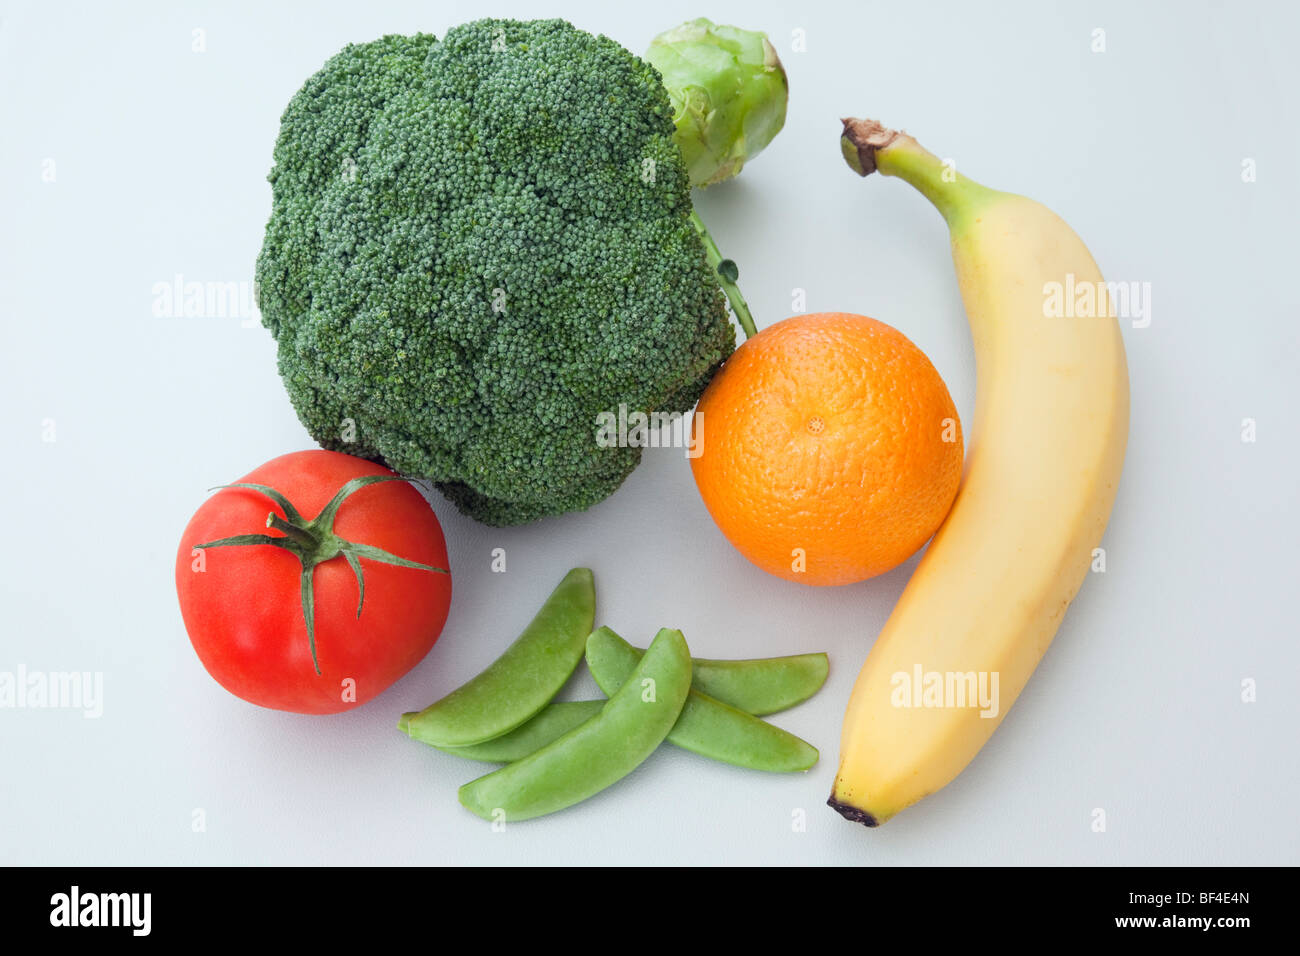 Five a day fresh fruit and vegetables, broccoli, tomato, mange tous, orange and banana for a healthy balanced diet Stock Photo